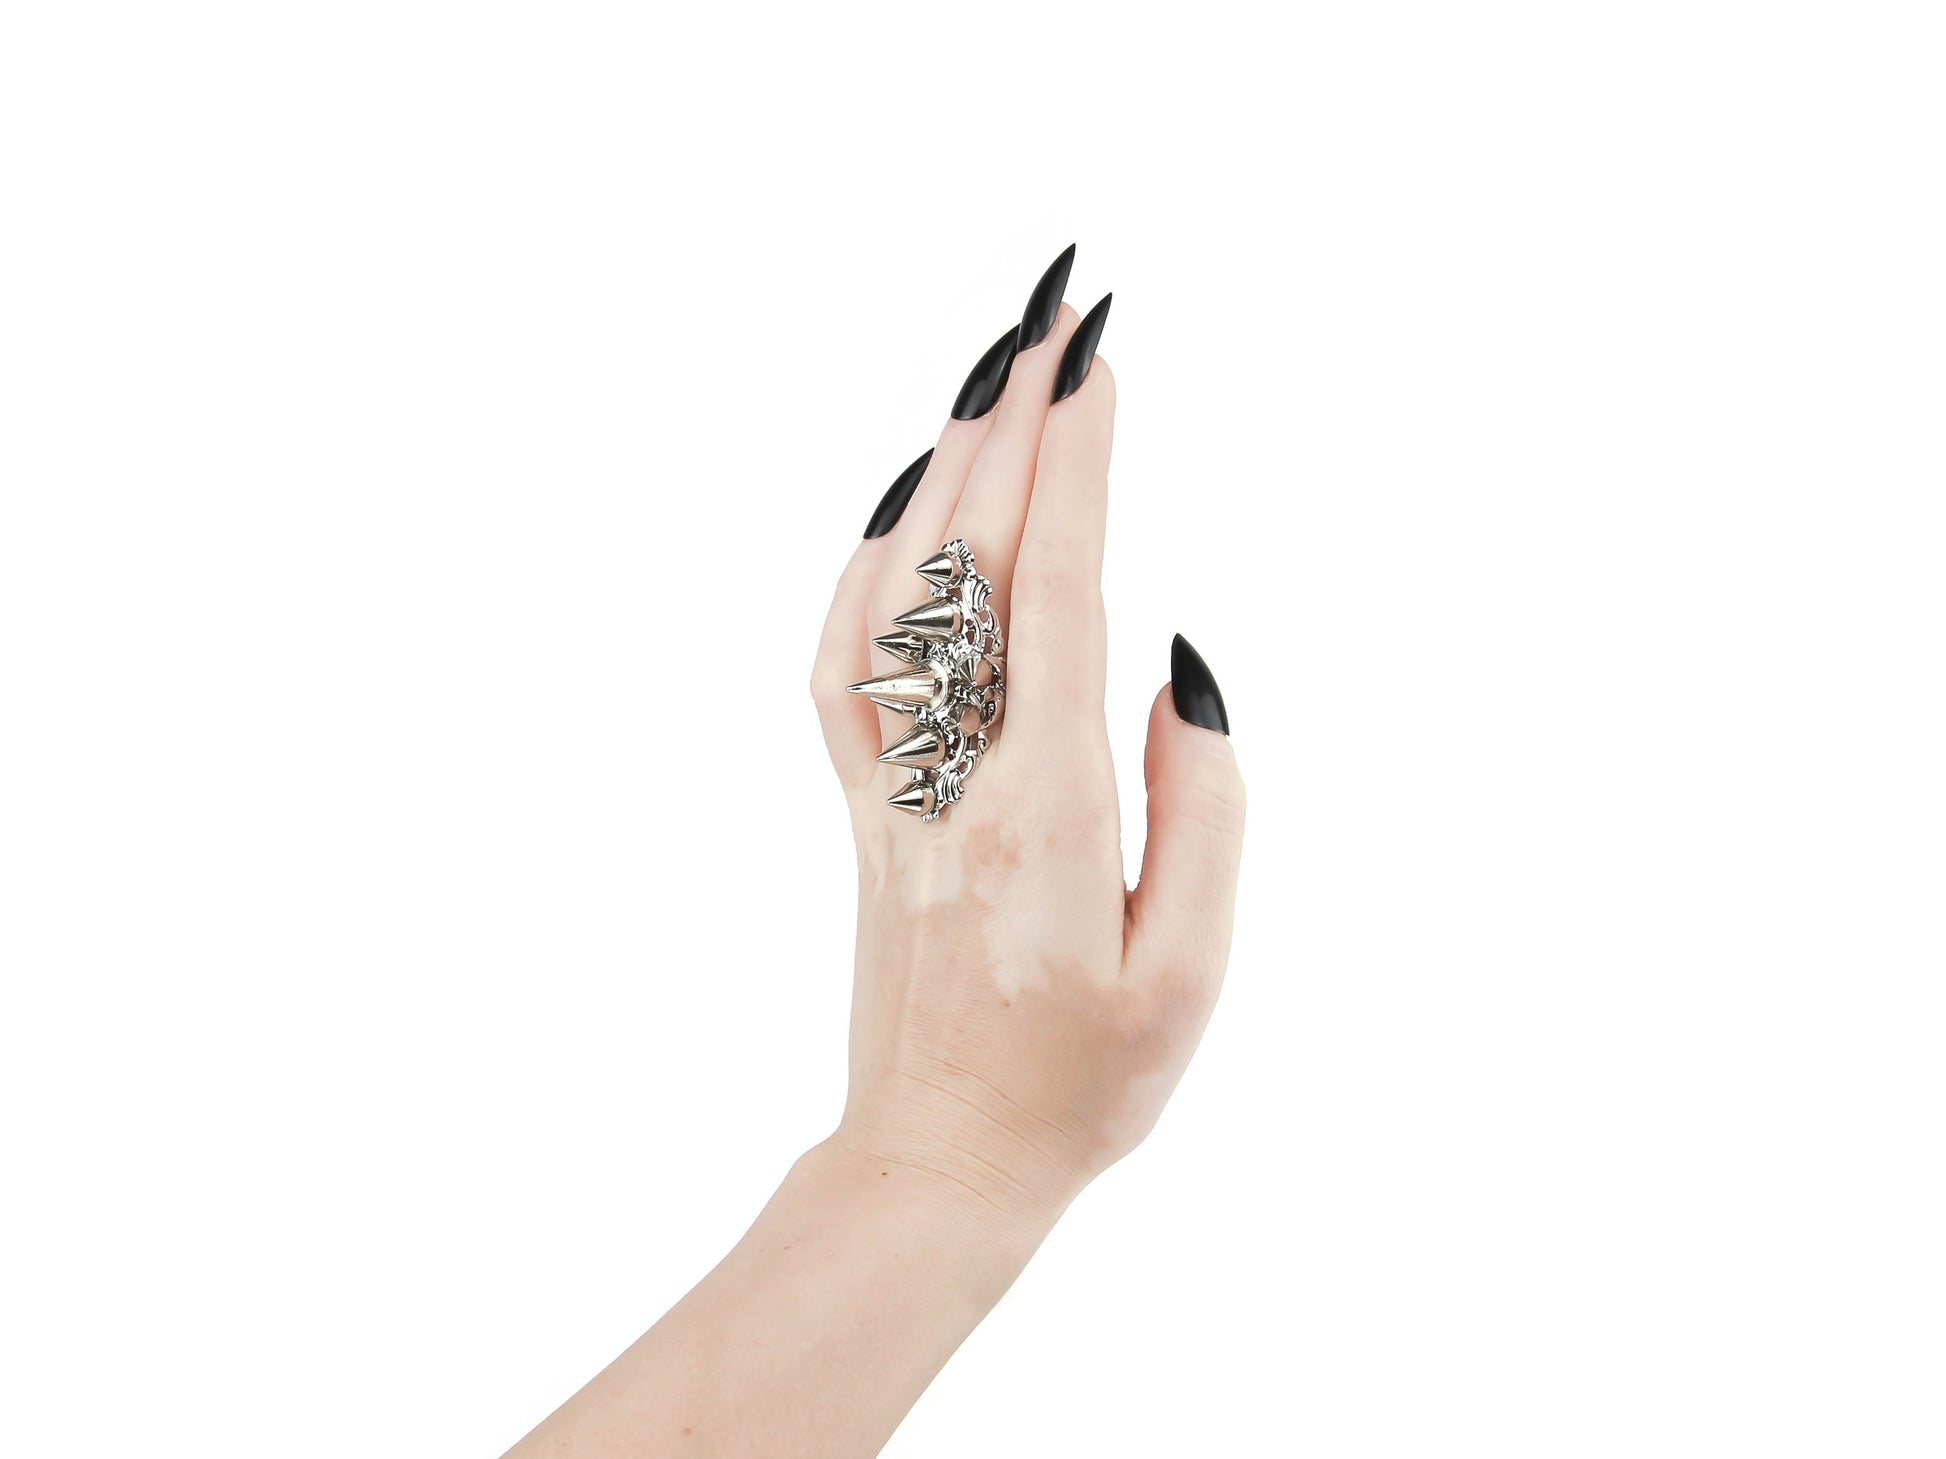 Capture the essence of punk rebellion with Myril Jewels' edgy studded ring. This bold statement piece, with its sharp studs and metallic finish, is a must-have for lovers of dark-avantgarde and gothic accessories. Ideal for Halloween, it also complements everyday minimal goth looks, Witchcore styles, and Gothic-chic ensembles, offering a versatile addition to any Neo Gothic jewel collection